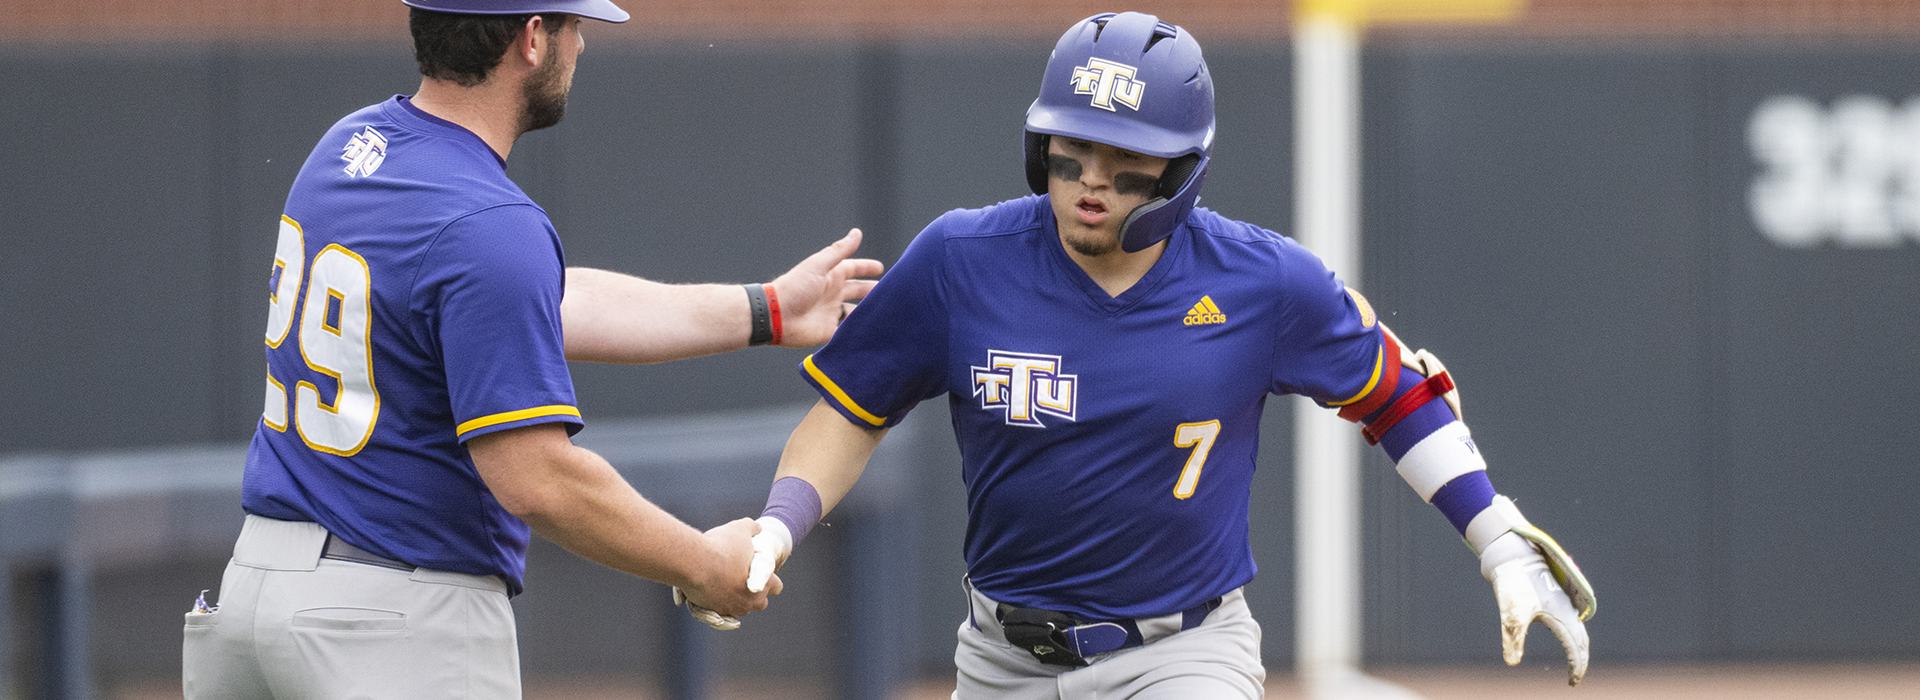 No. 22 Georgia Tech pulls away from Golden Eagles late in series opener